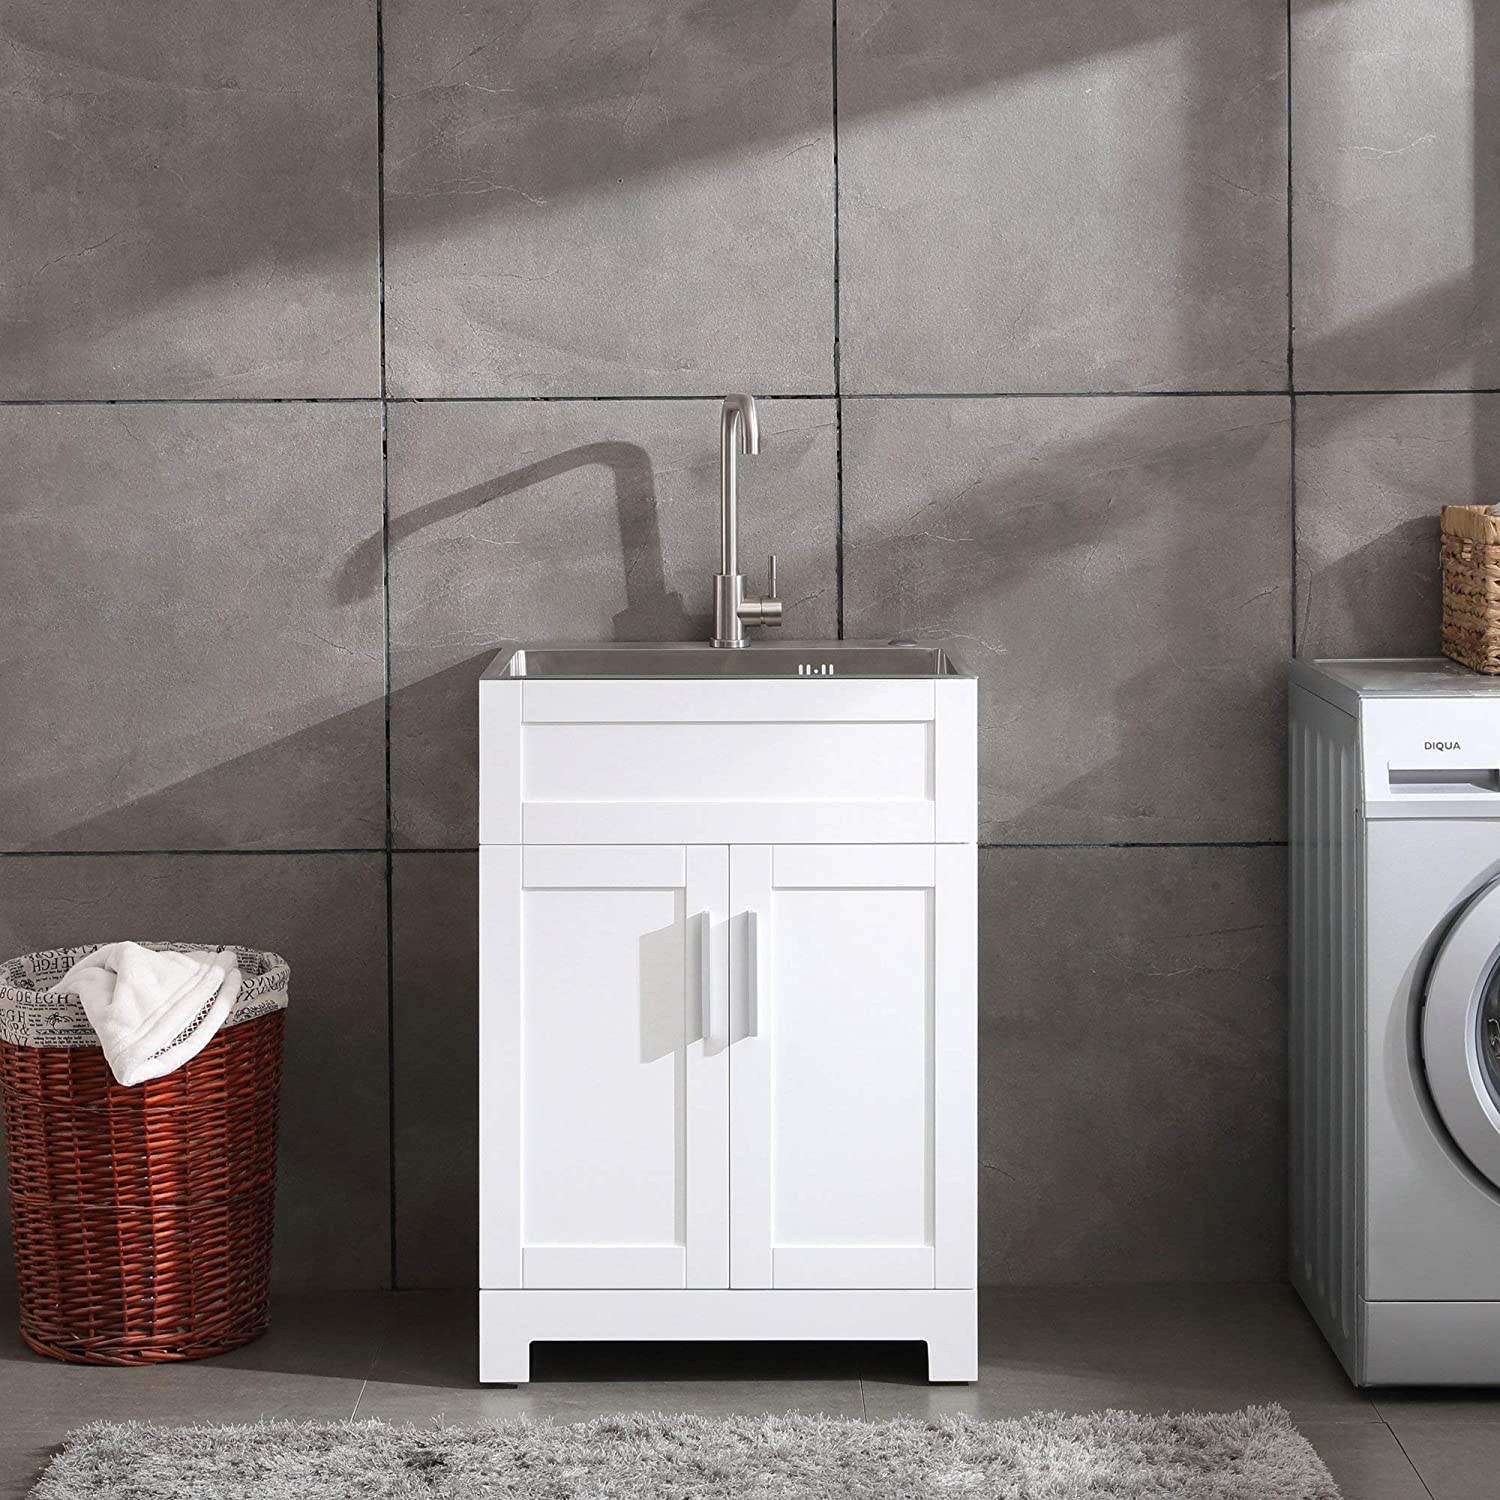 https://visualhunt.com/photos/13/24-white-laundry-utility-cabinet-w-stainless-steel-sink-and-faucet-combo.jpg